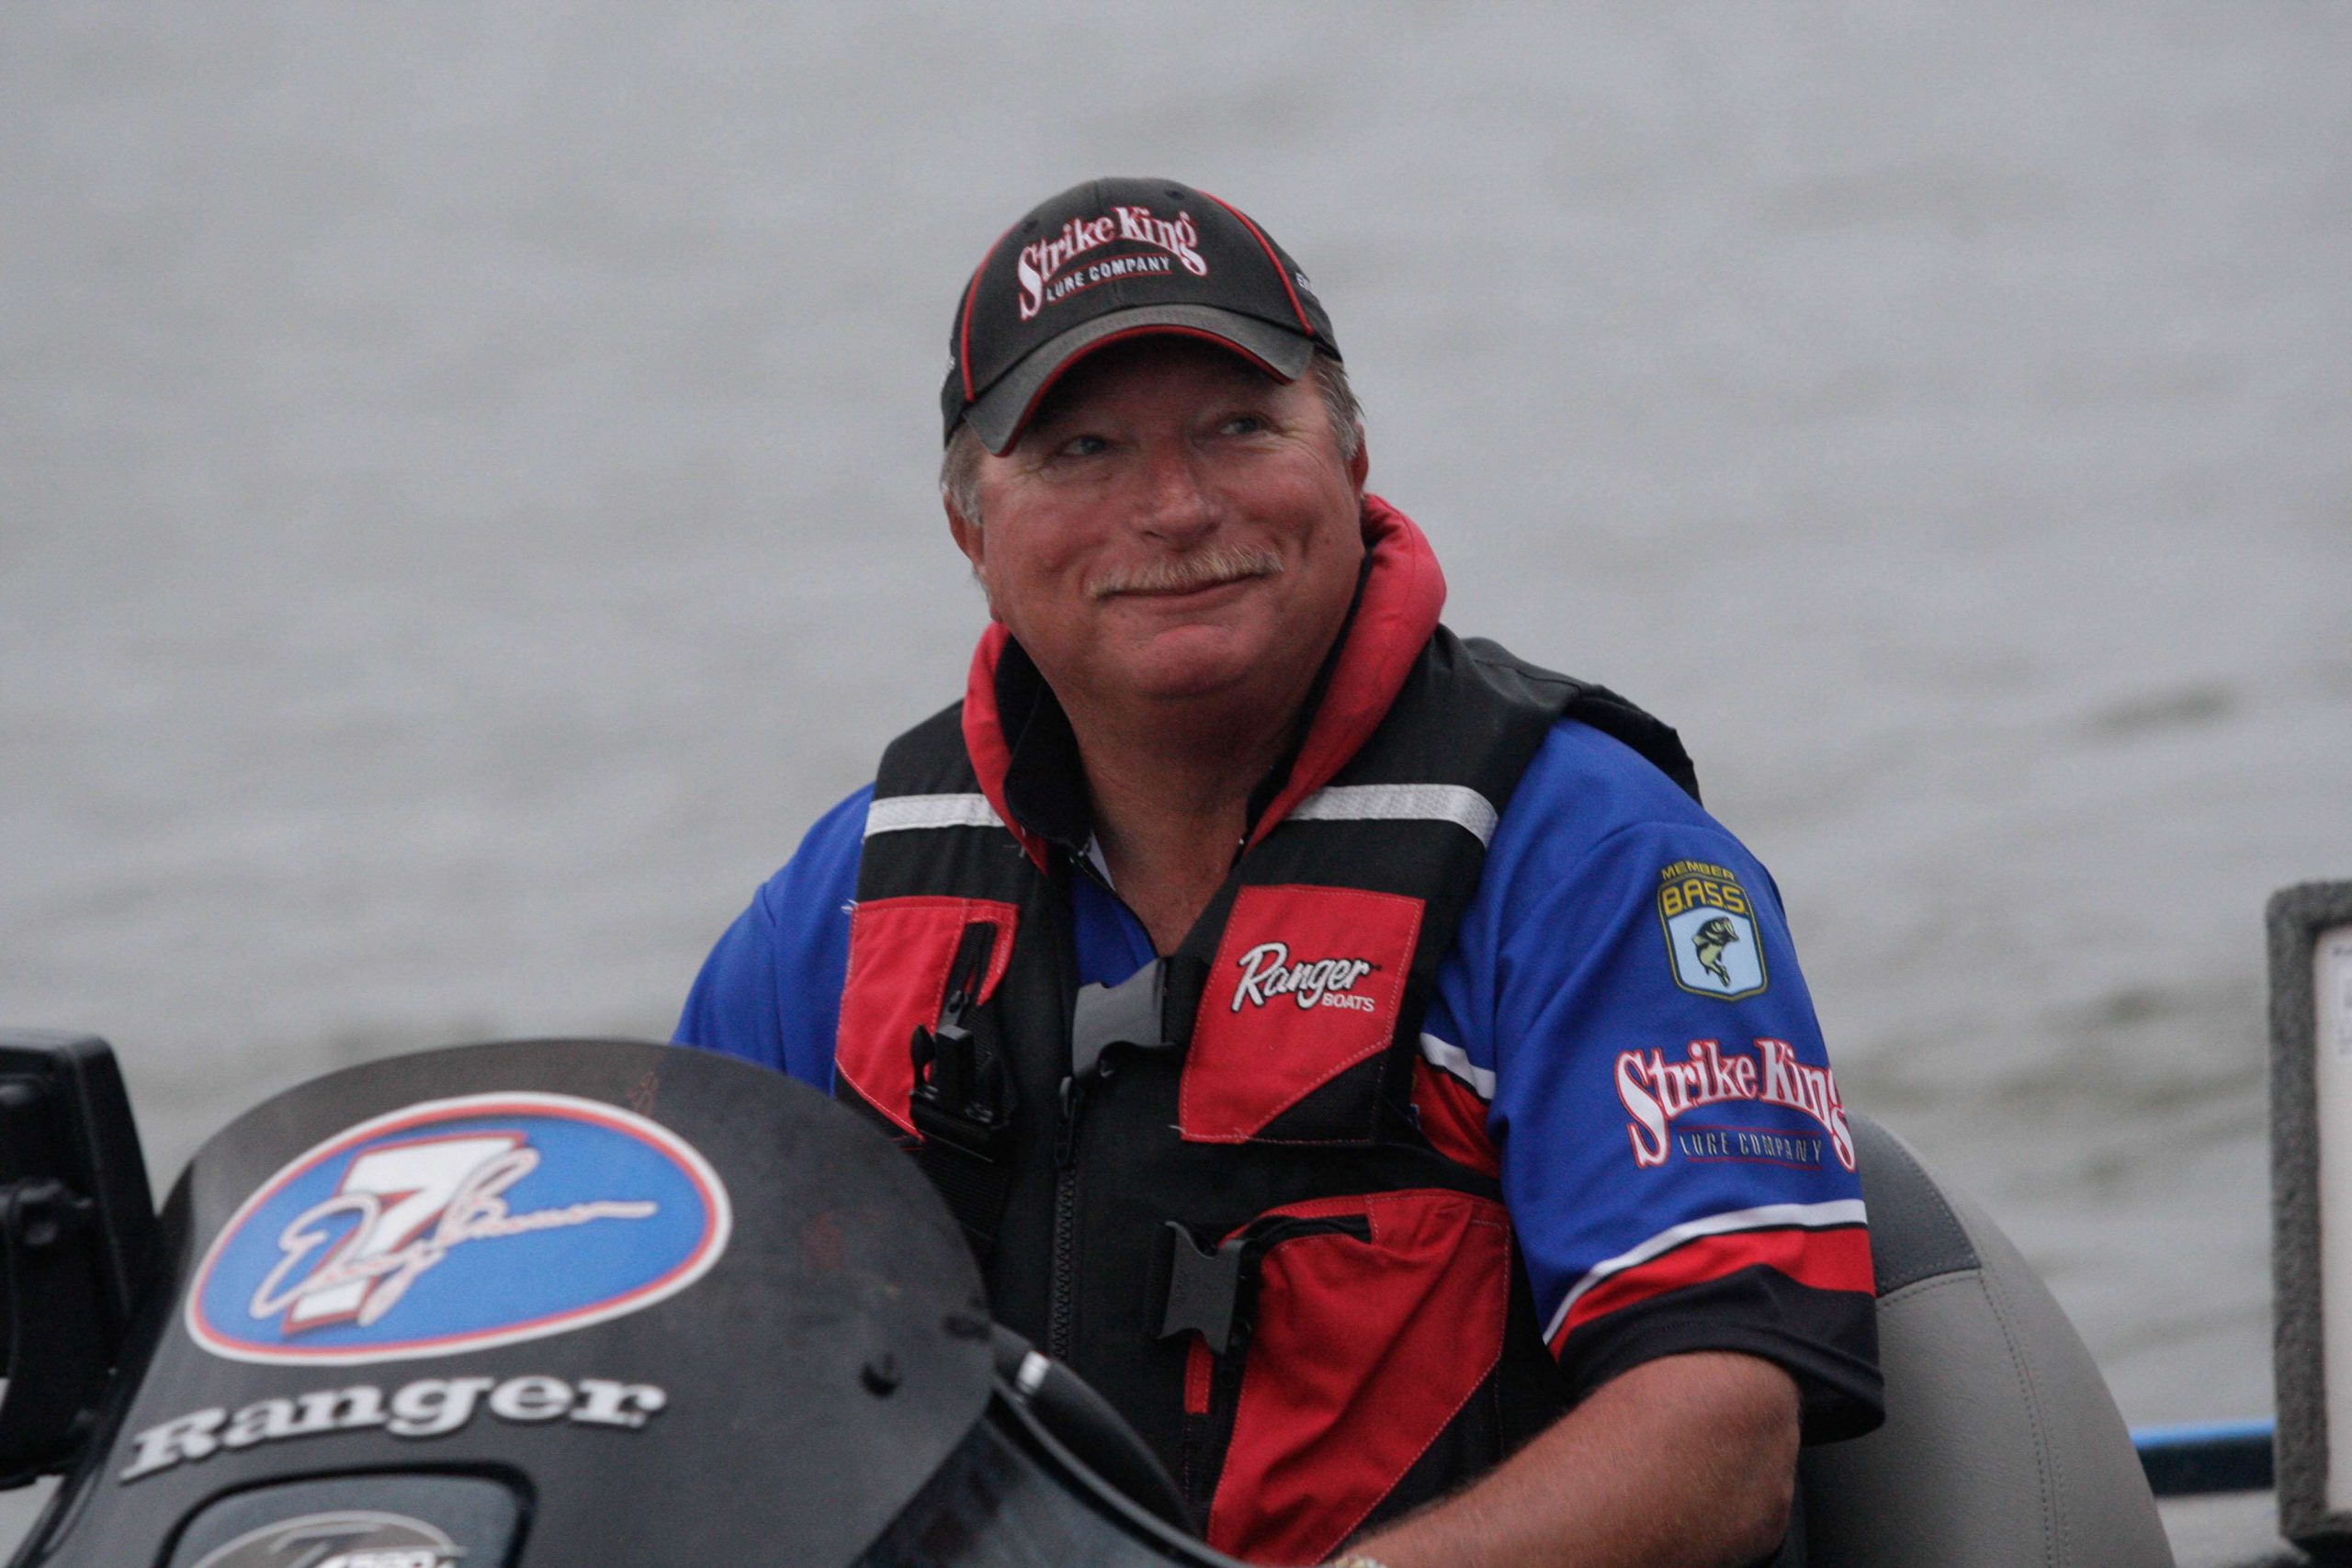 Denny Brauer, now retired from the Elite Series, flashed his signature smile at the beginning of Day 3. He caught 70 pounds total and ended in 18th place.